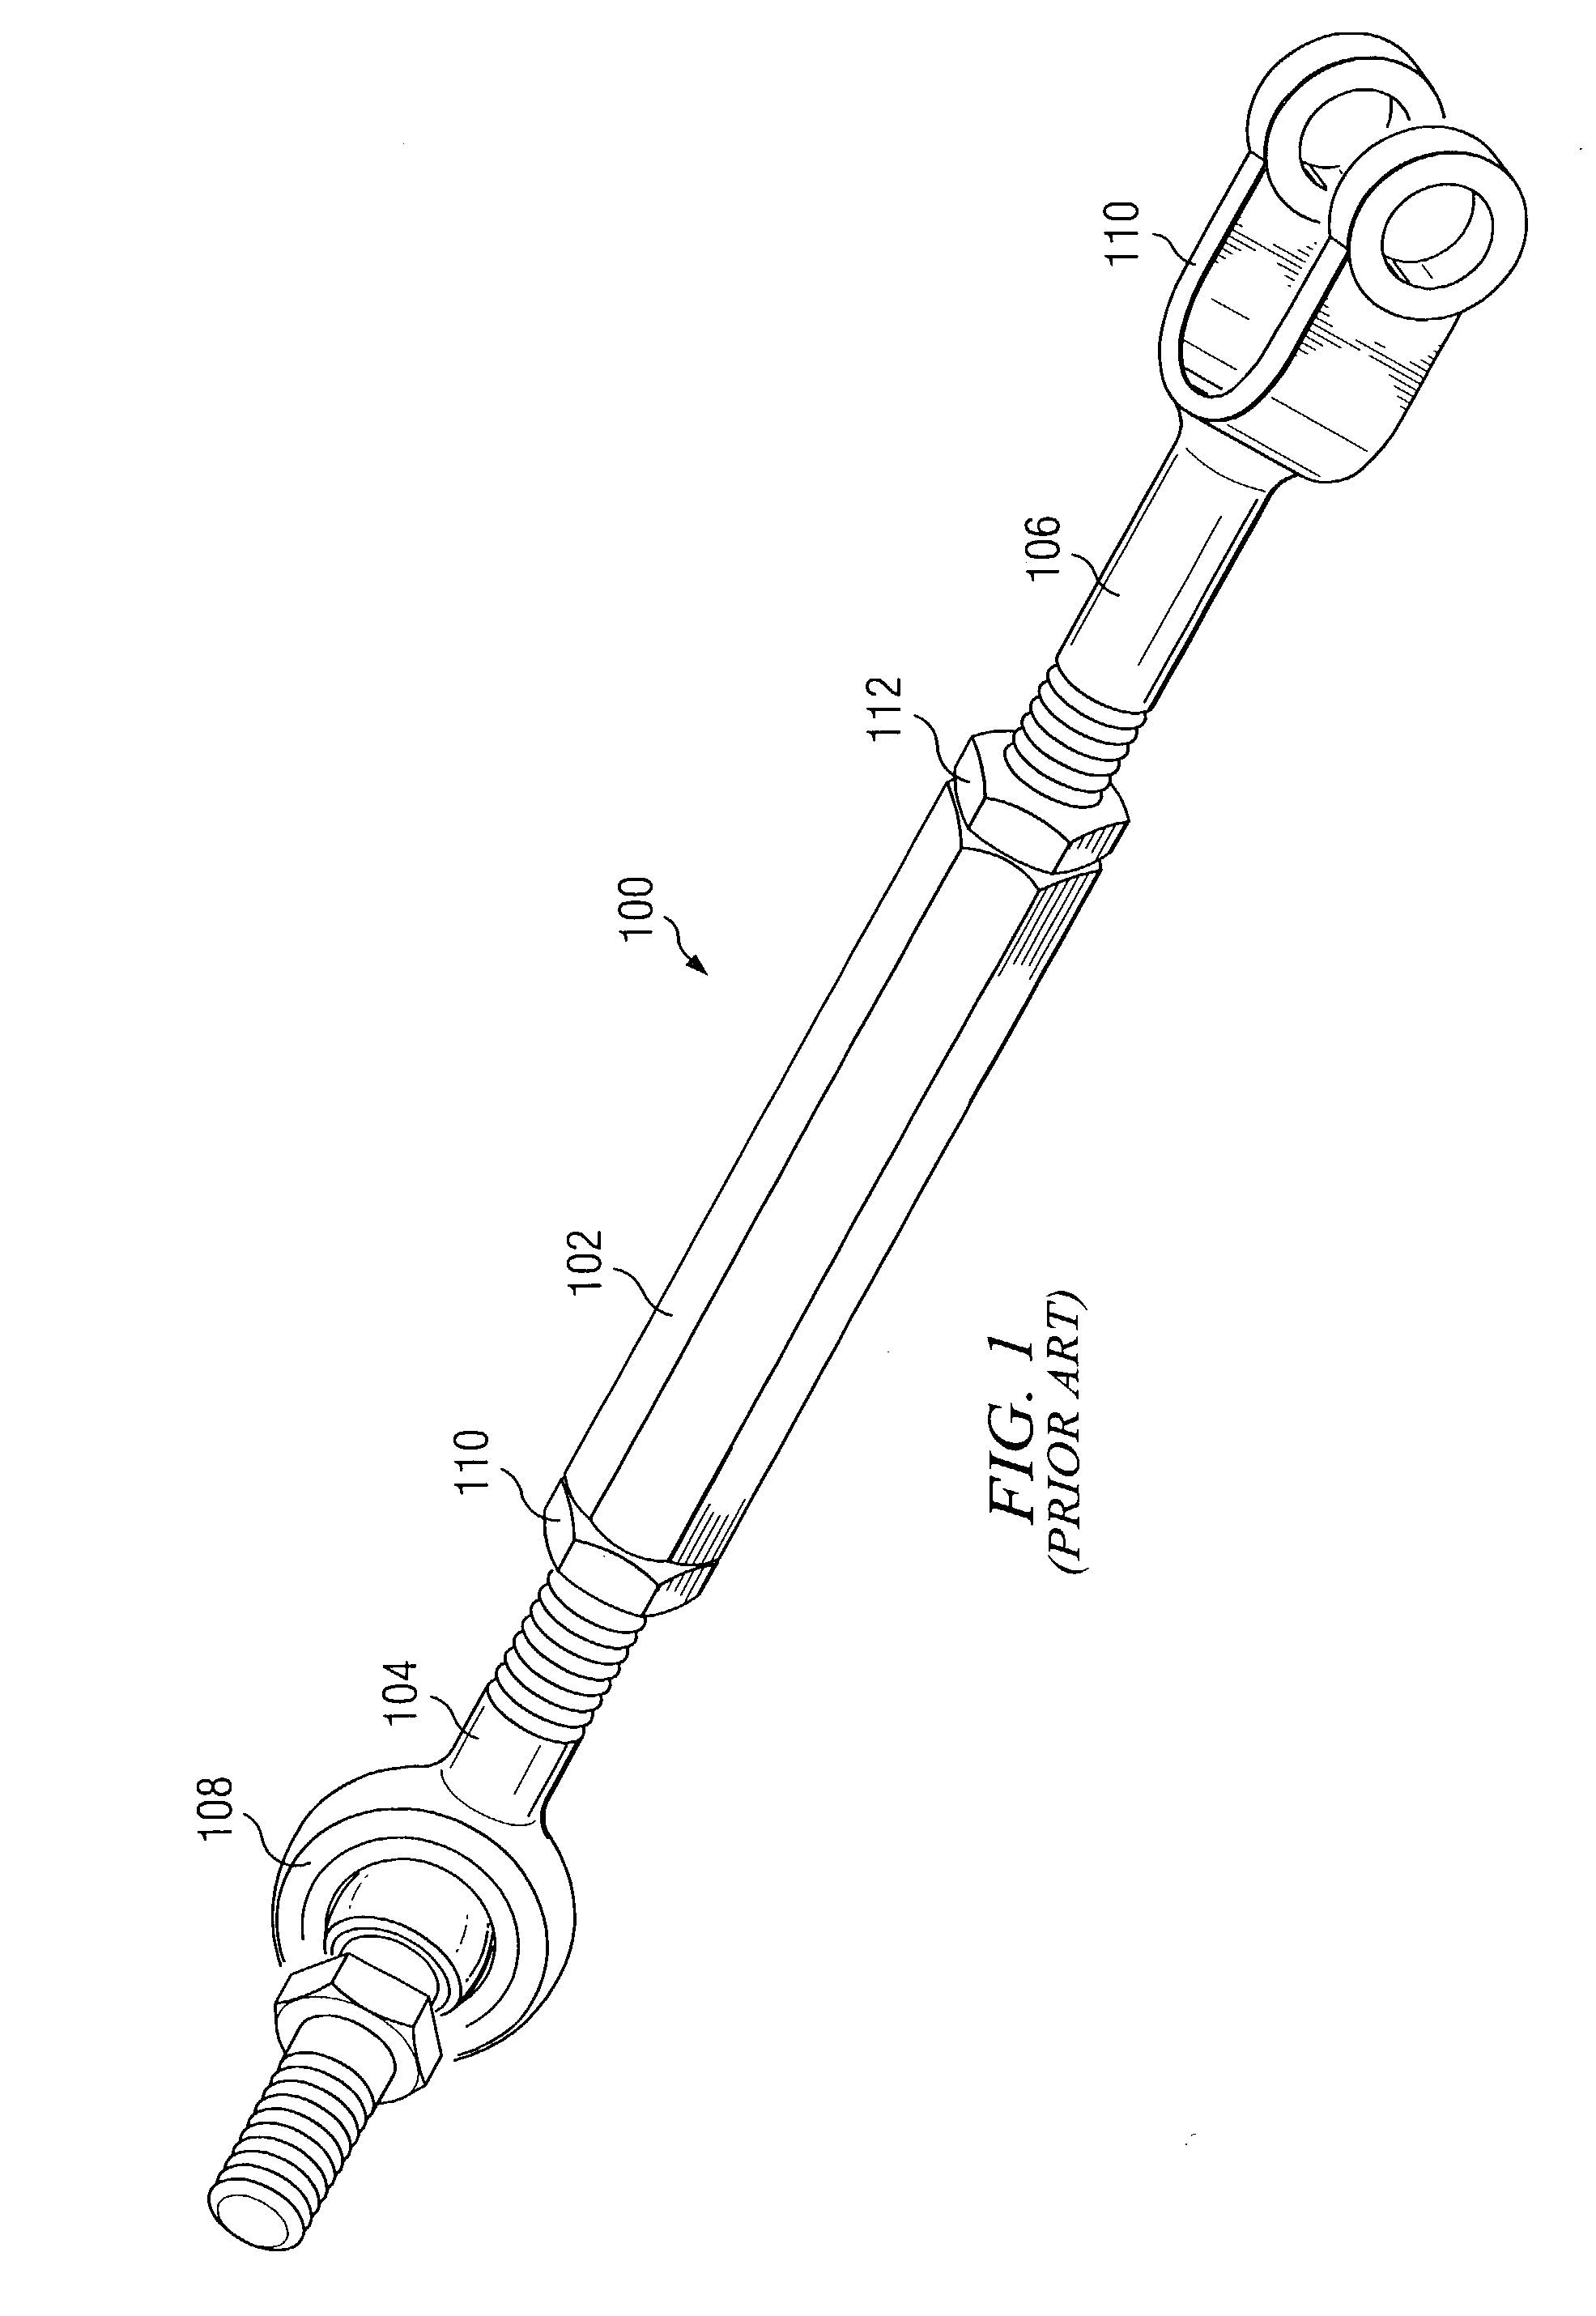 Turnbuckle linkage assembly